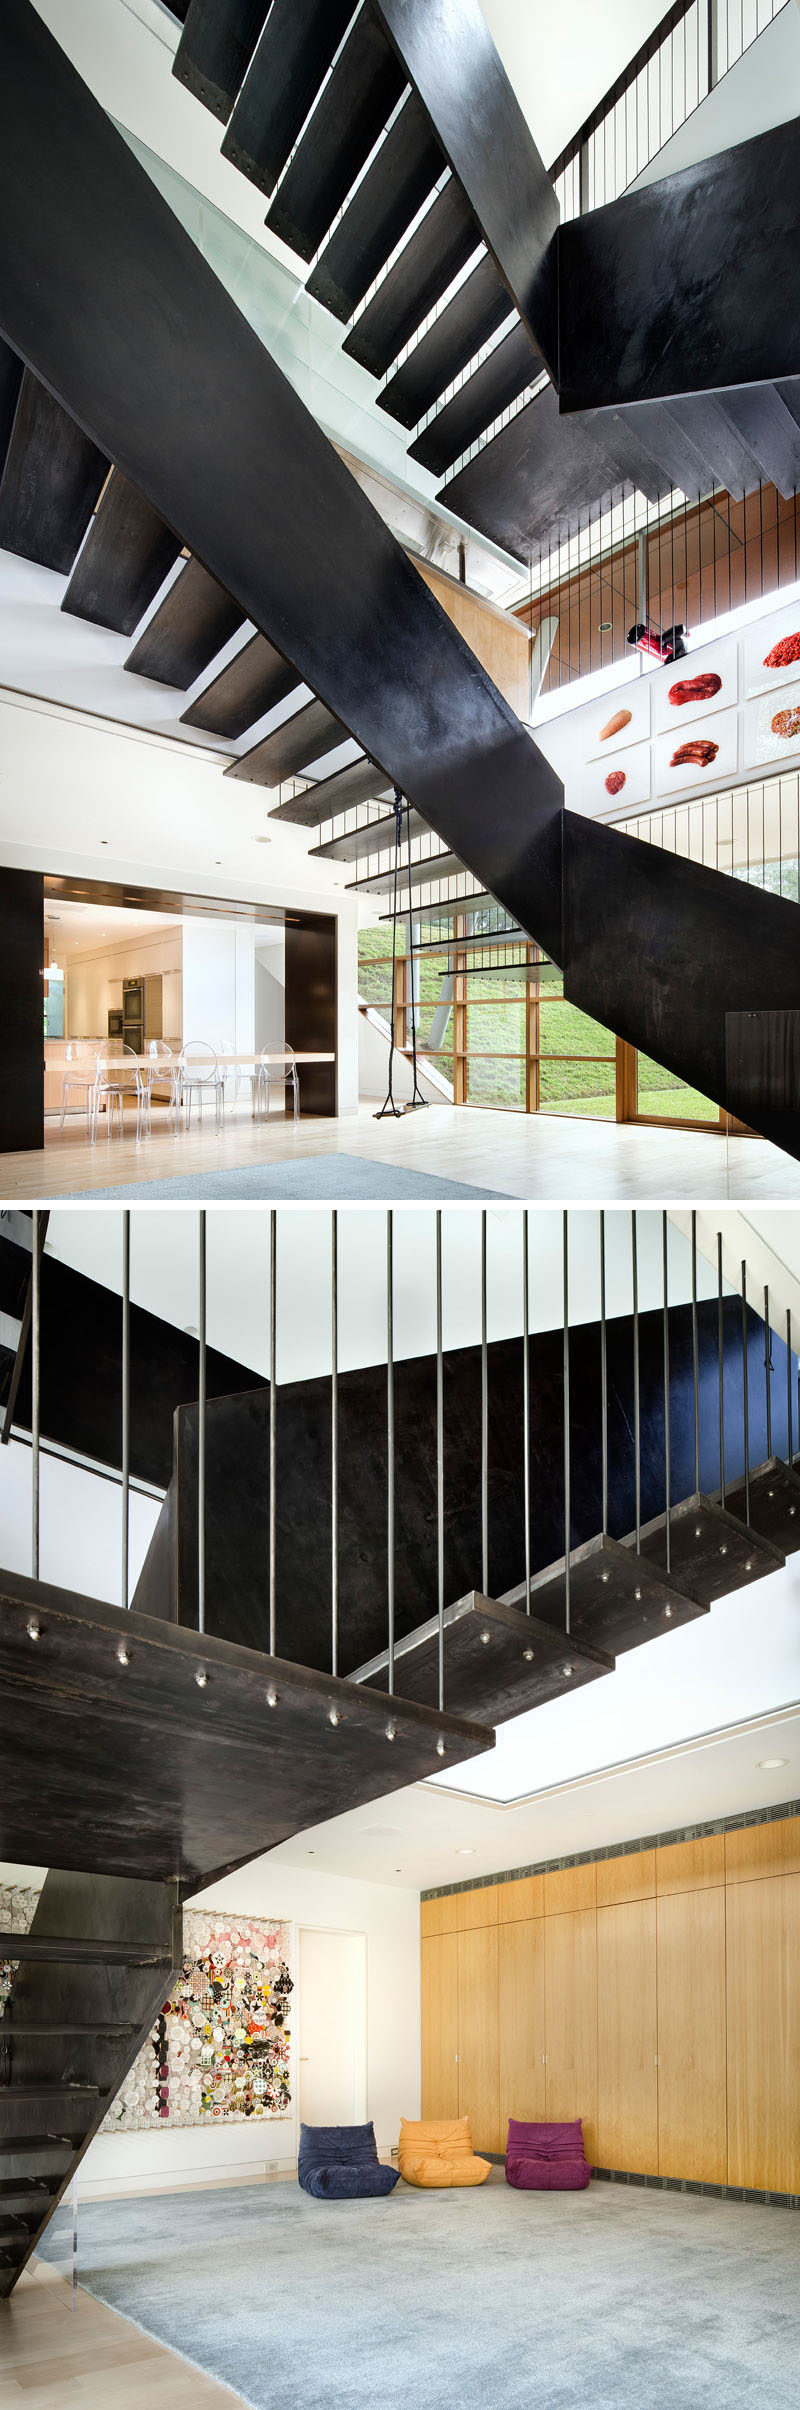 Industrial-looking stairs made from steel connect the various levels of this modern home.